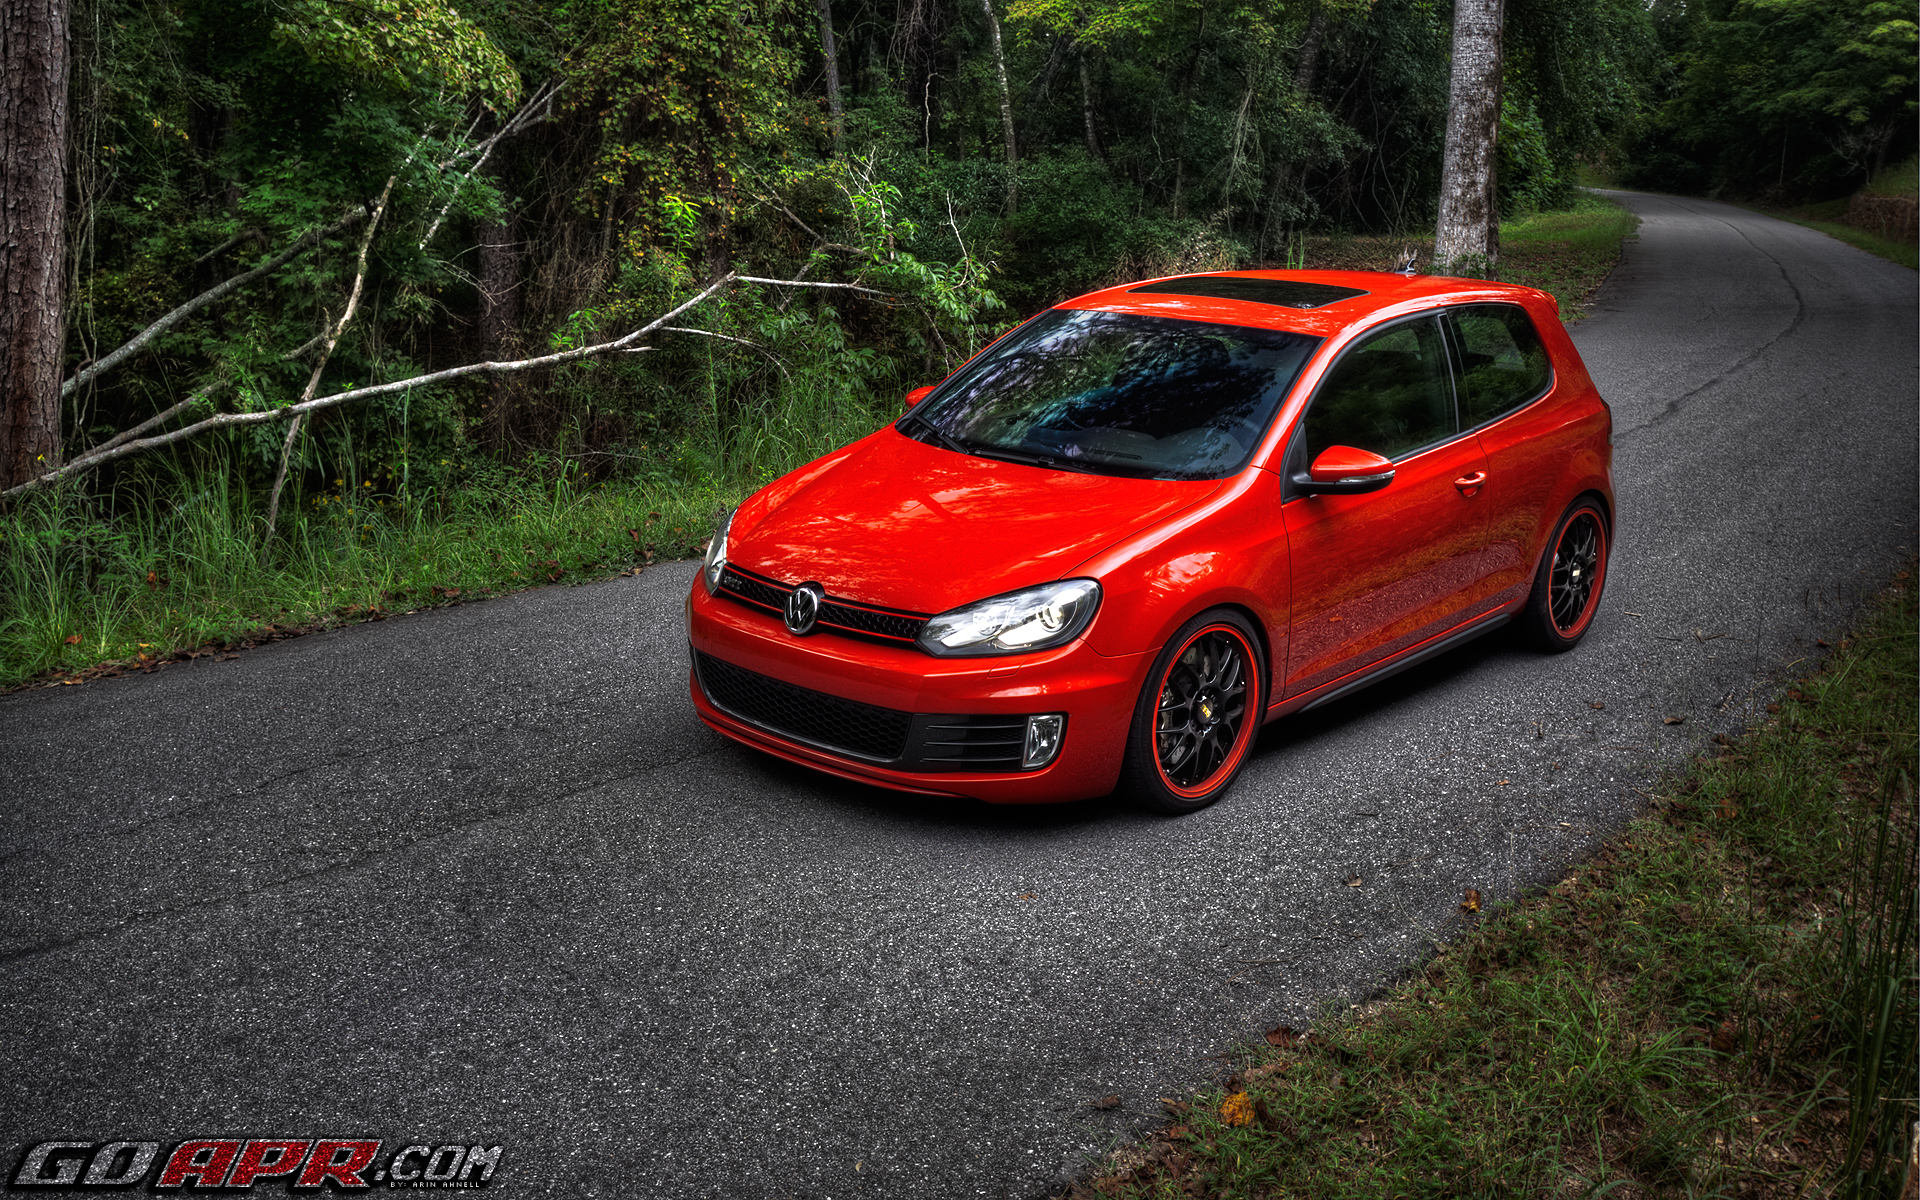 The Apr Stage Iii Mk6 Gti Out For A Drive